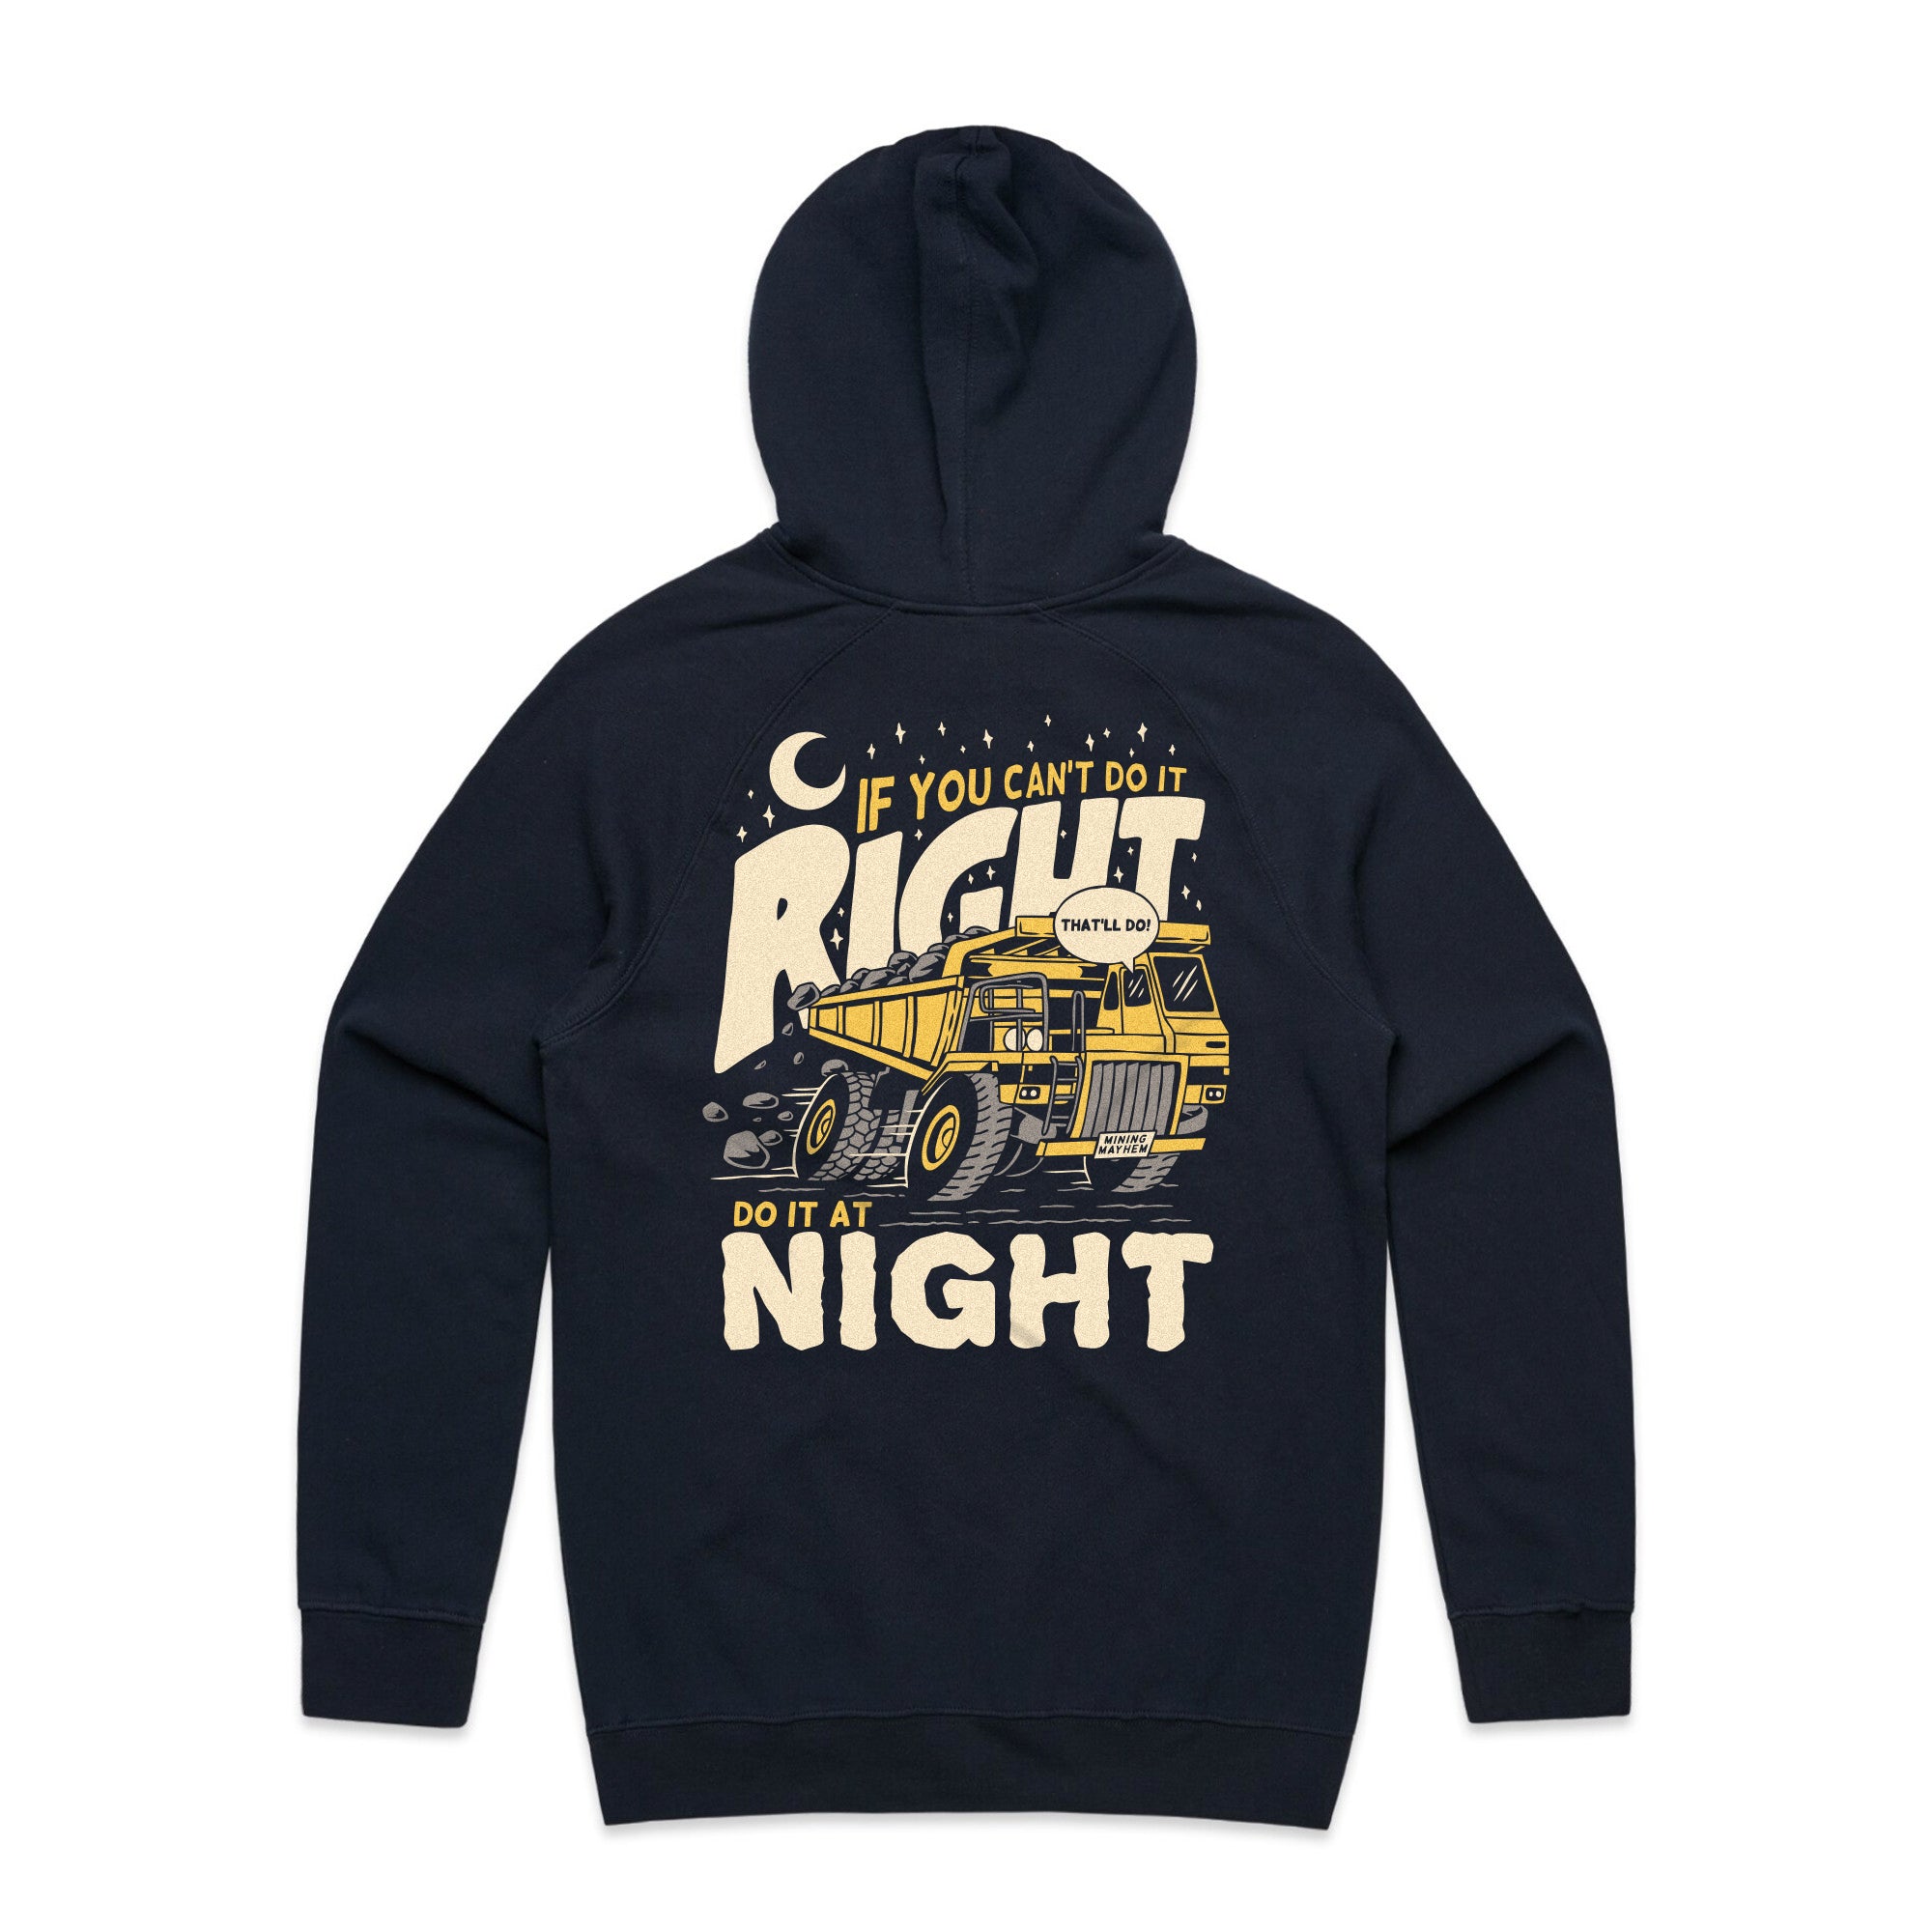 If You Can't Do It Right, Do It At Night - Hoodie (Navy)